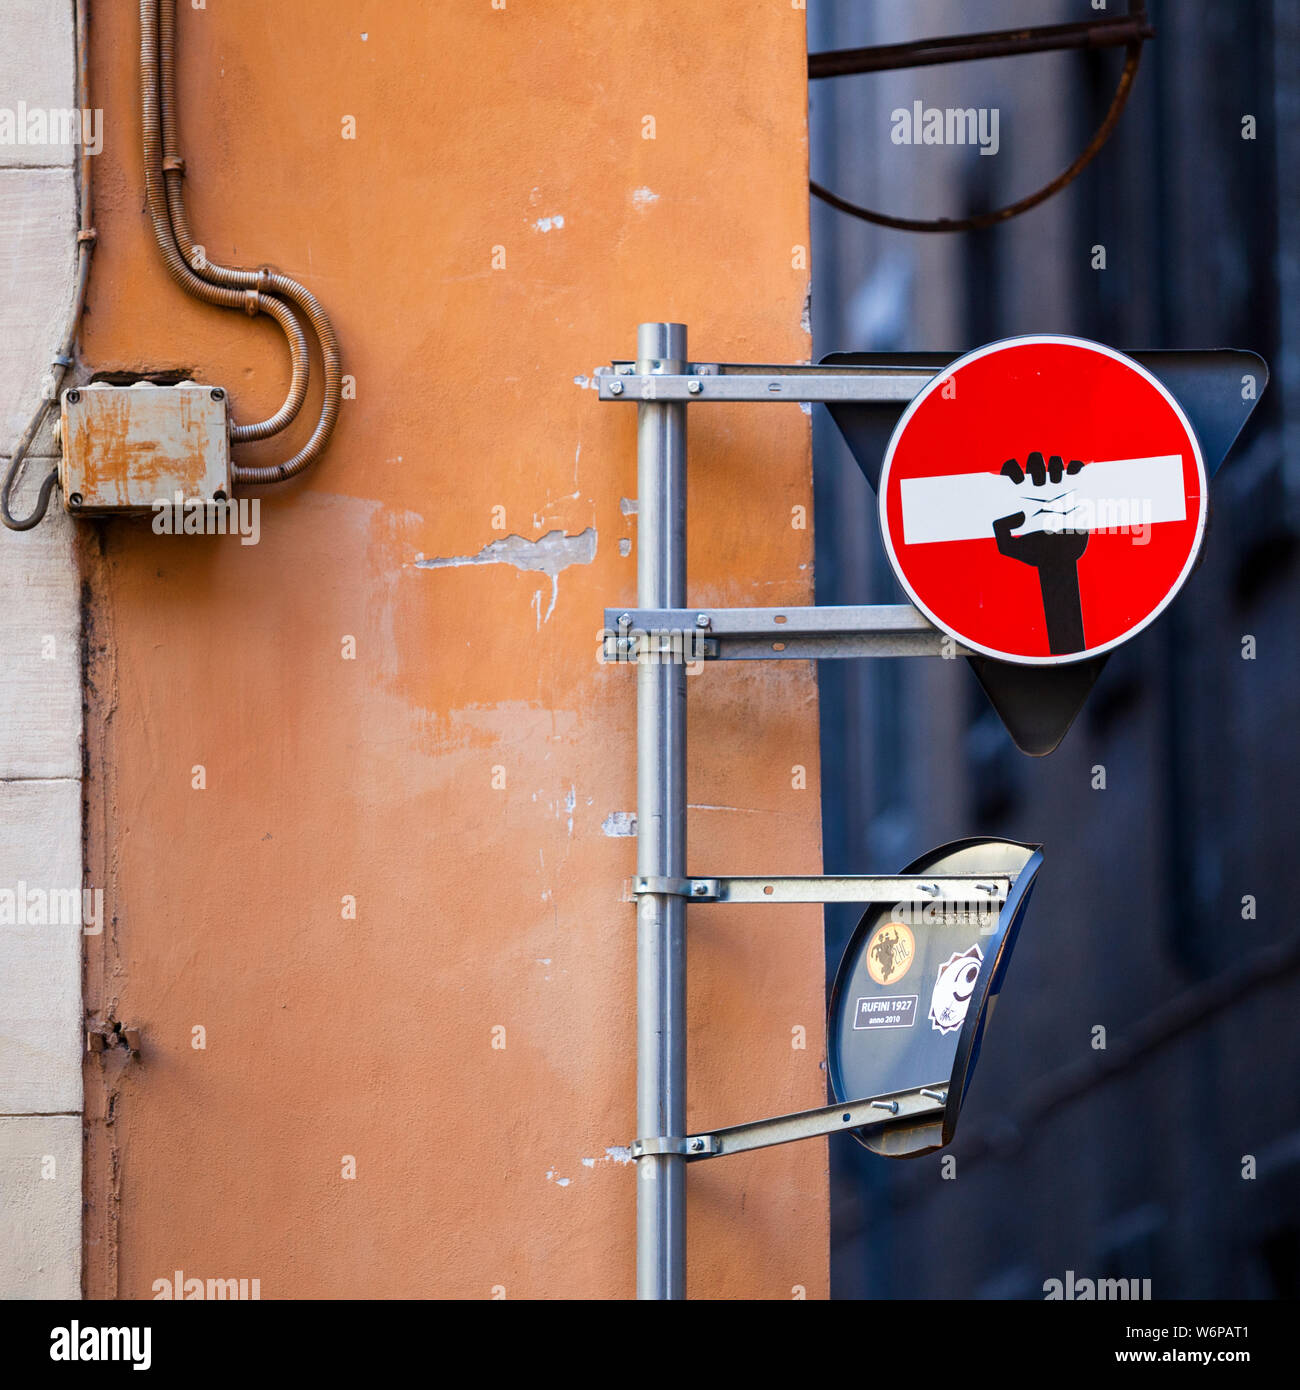 Modified one-way-sign in Rome, Italy Stock Photo